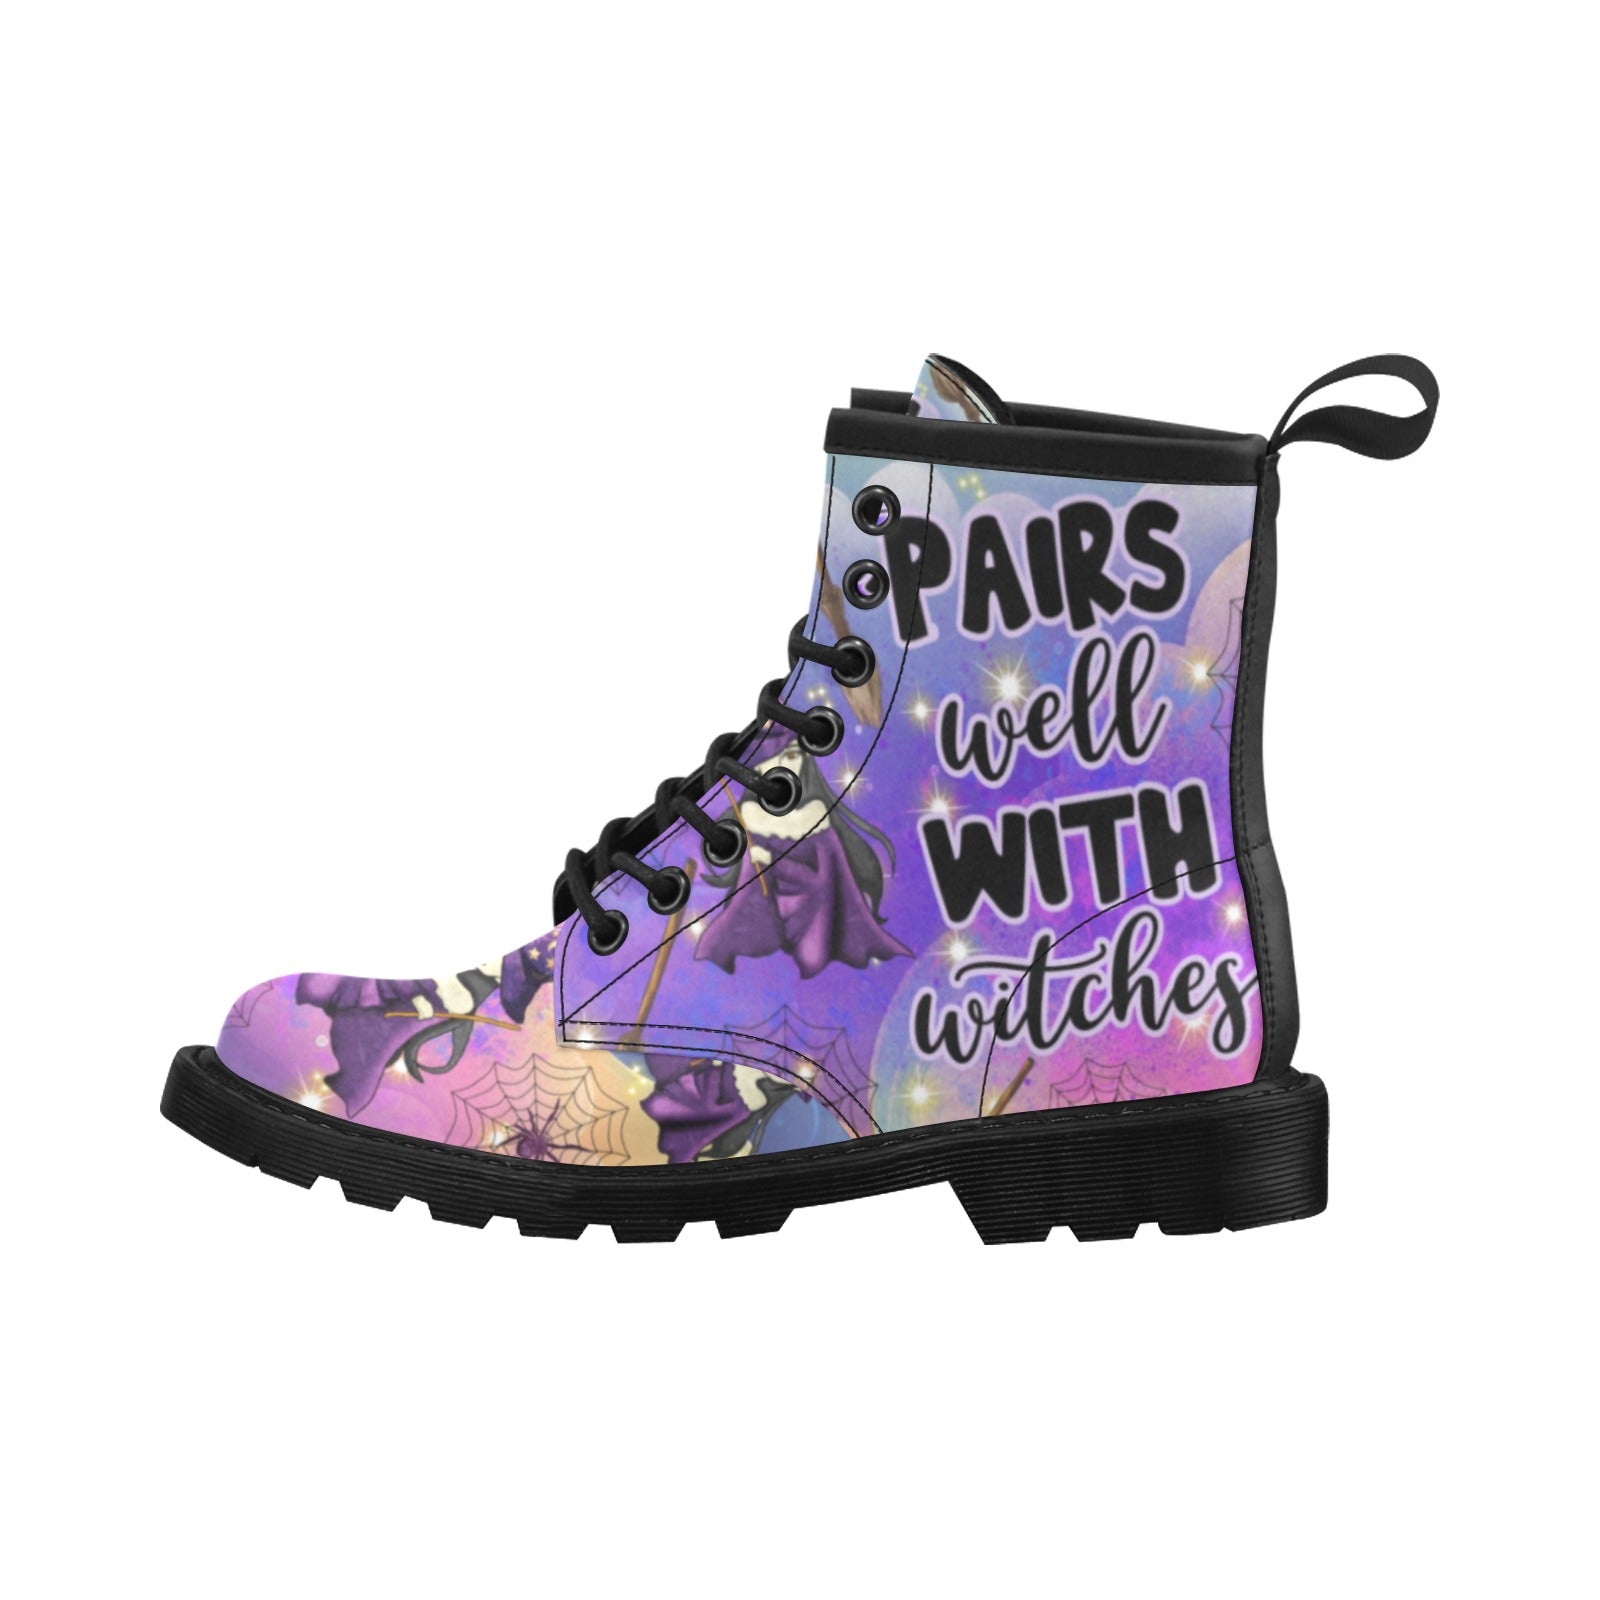 Witch Spellcasting Martin Boots-MoonChildWorld